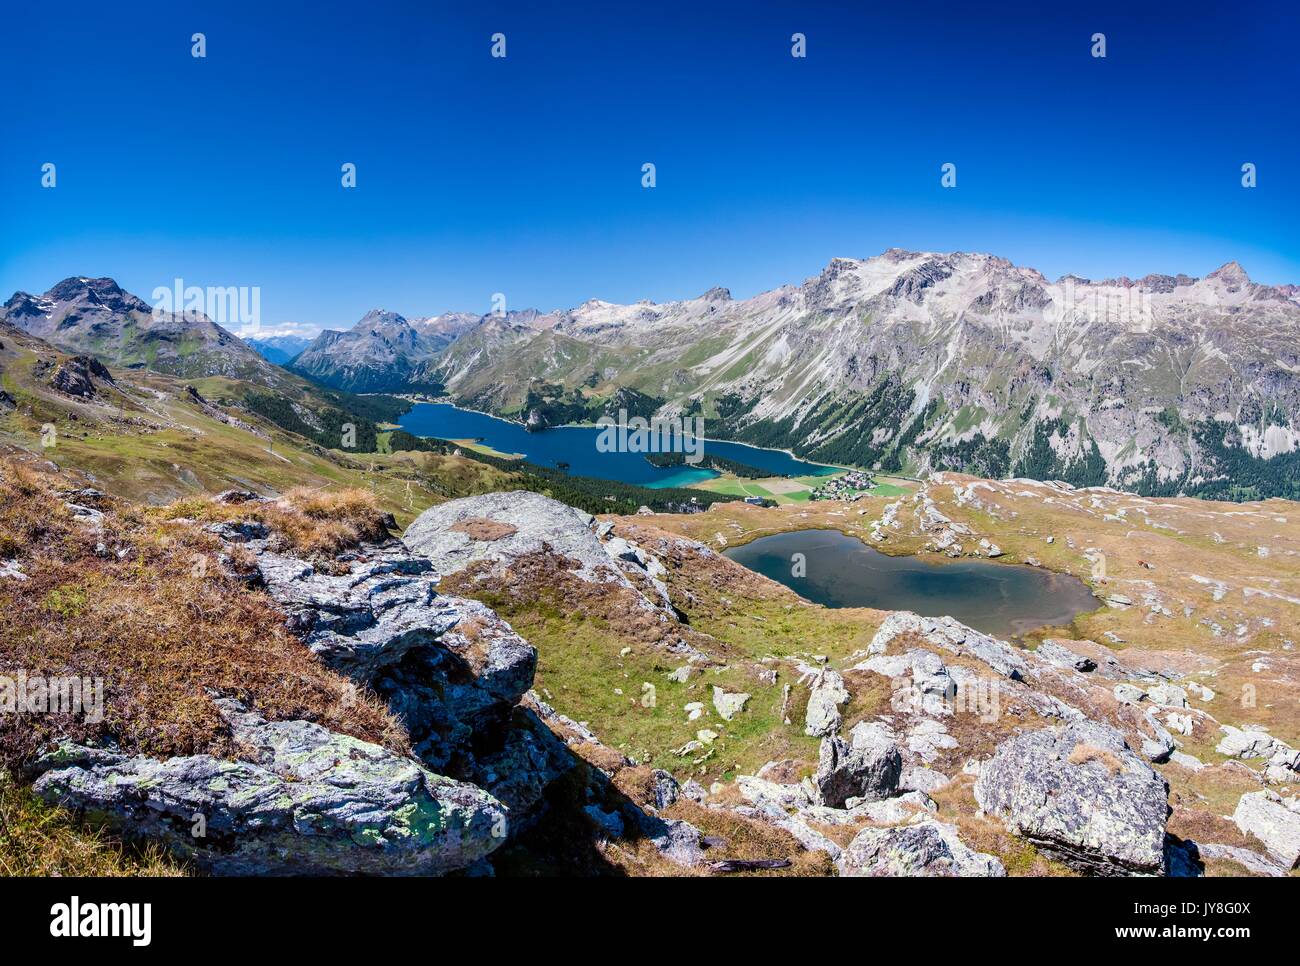 Panoramic view of Lake Sils from the lookout at the Lej Furtschellas, Engadine, Switzerland Stock Photo